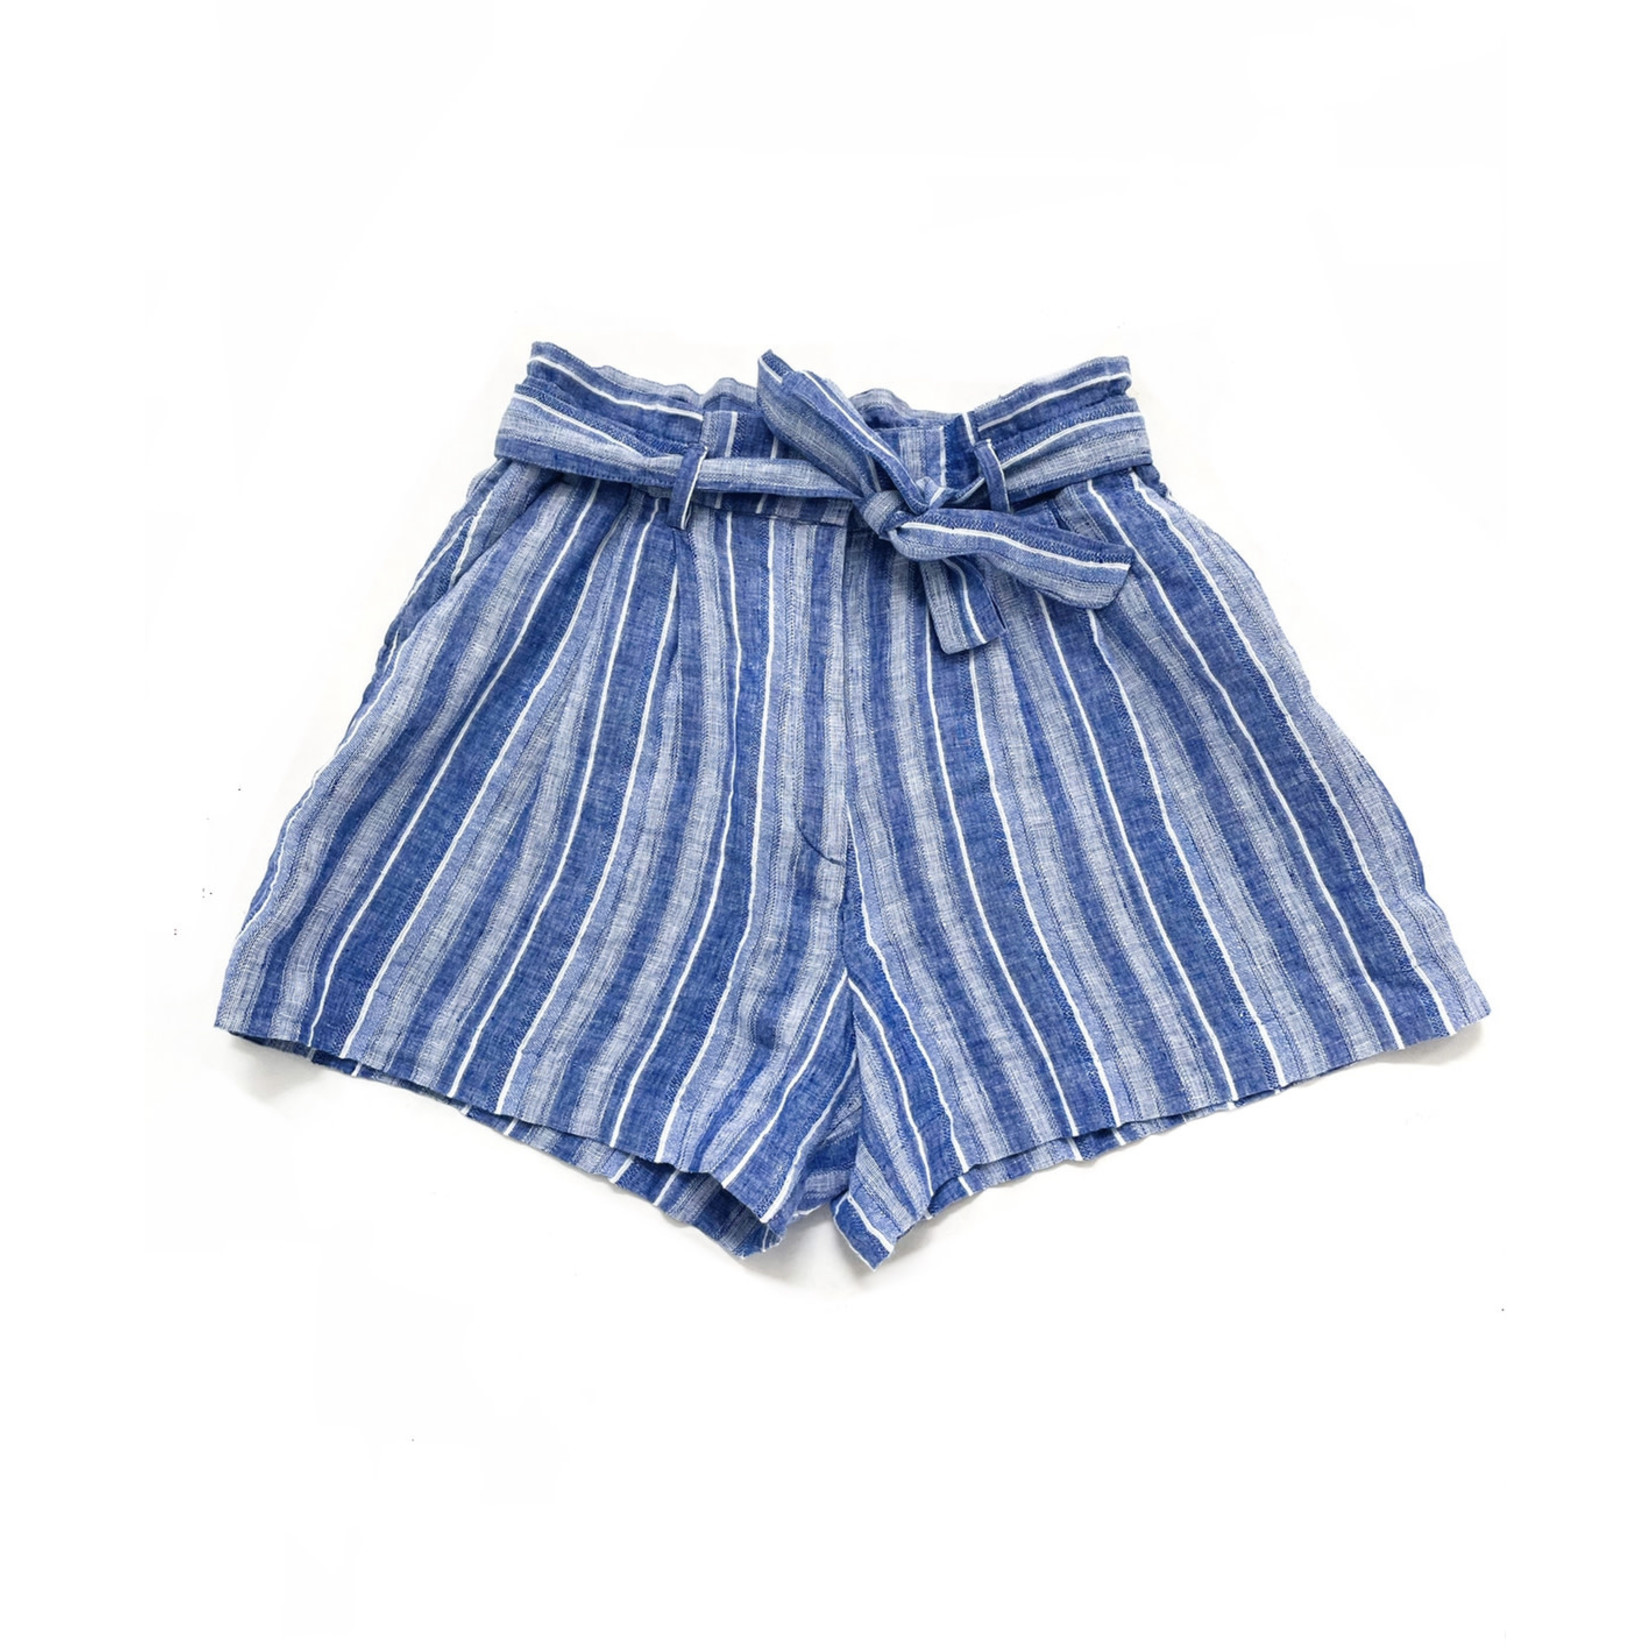 H&M H&M High-Waisted Striped Shorts - Size 8